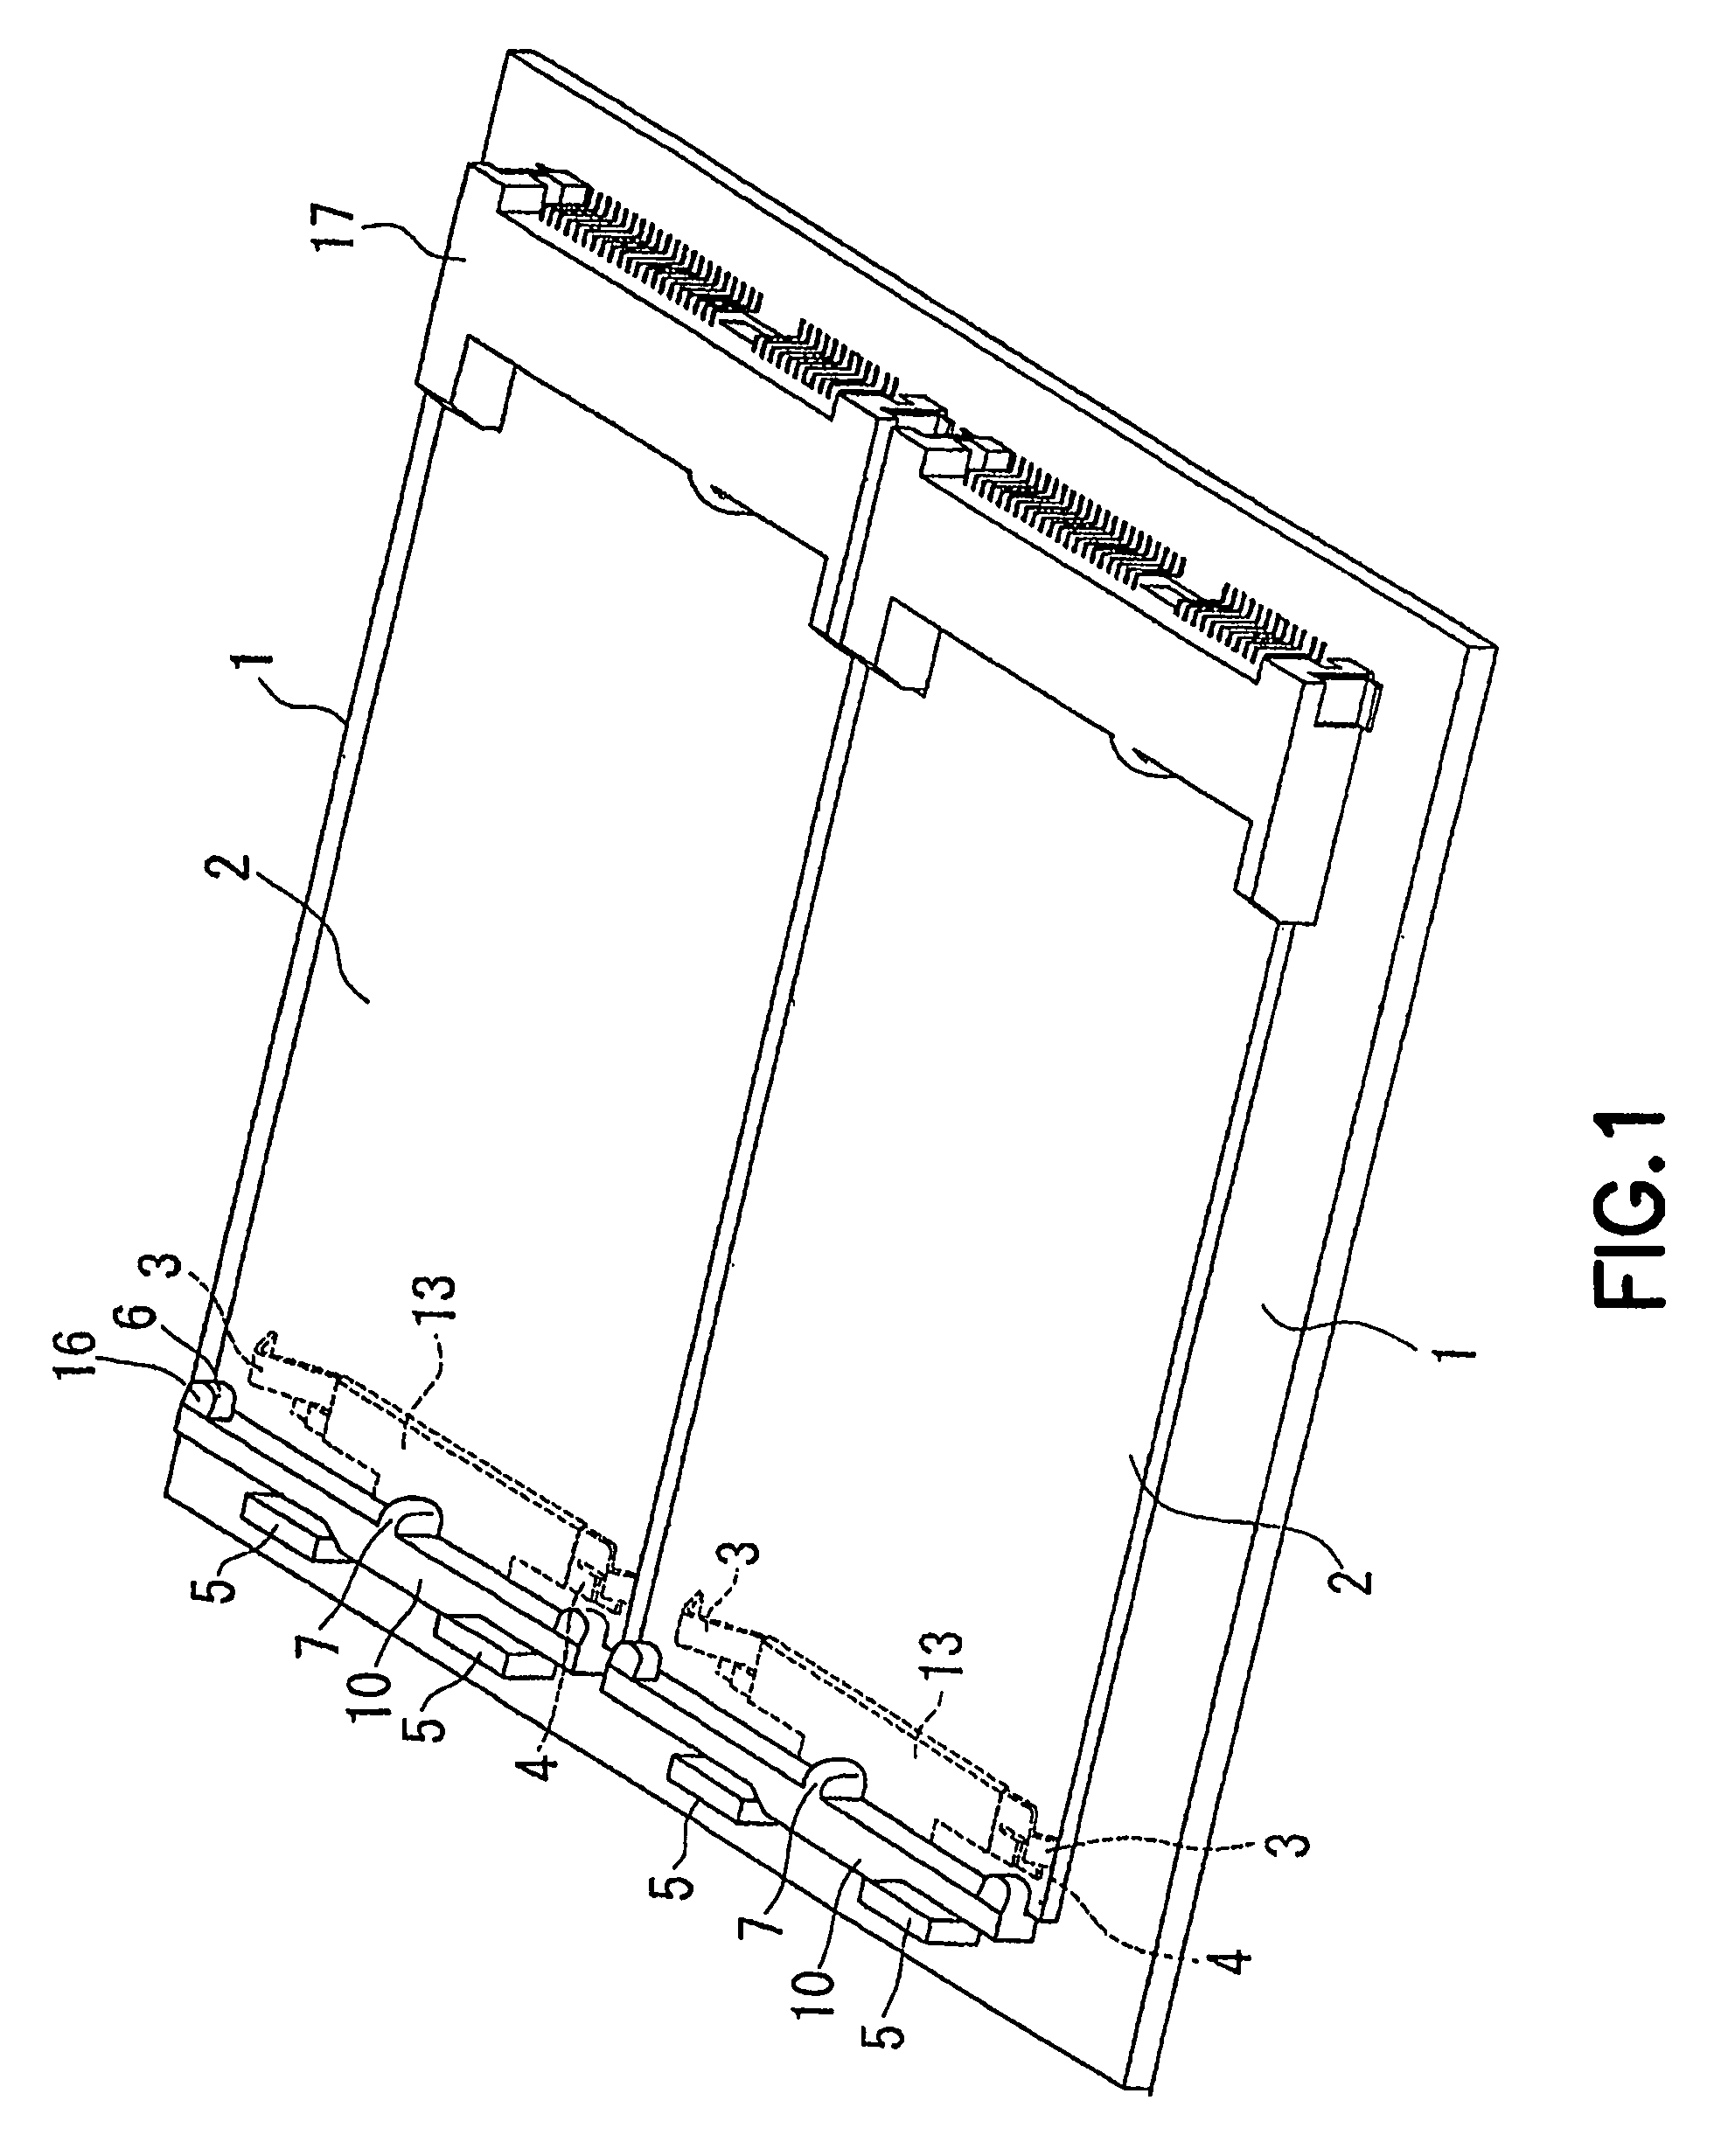 Board securing device